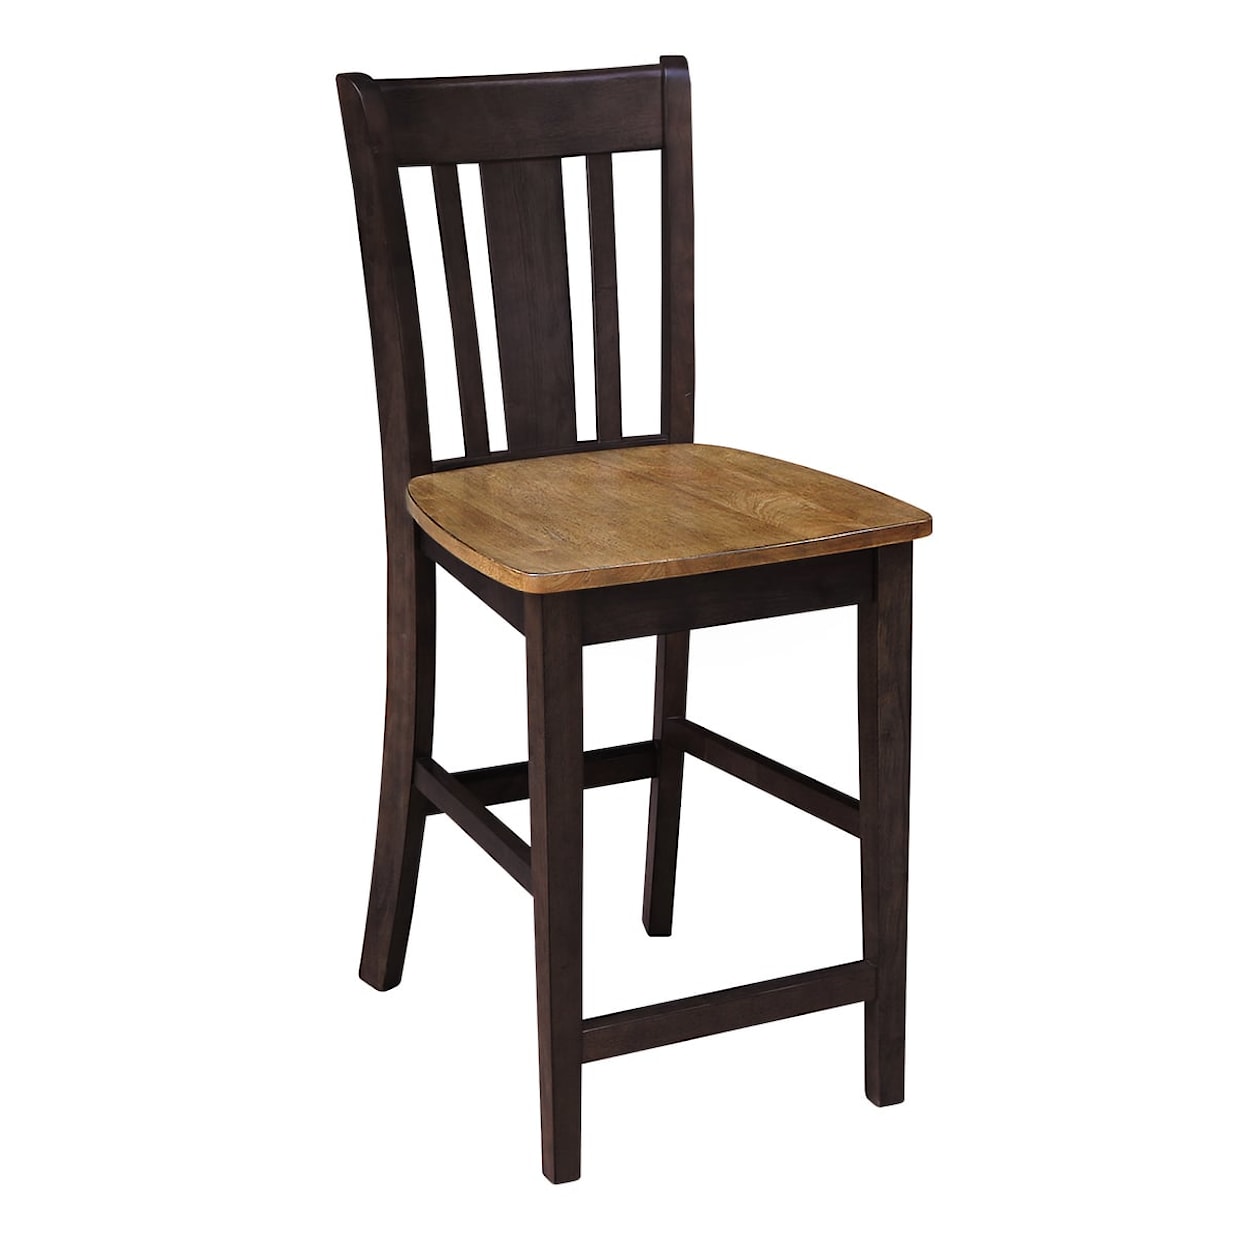 John Thomas Dining Essentials San Remo Stool in Hickory Coal